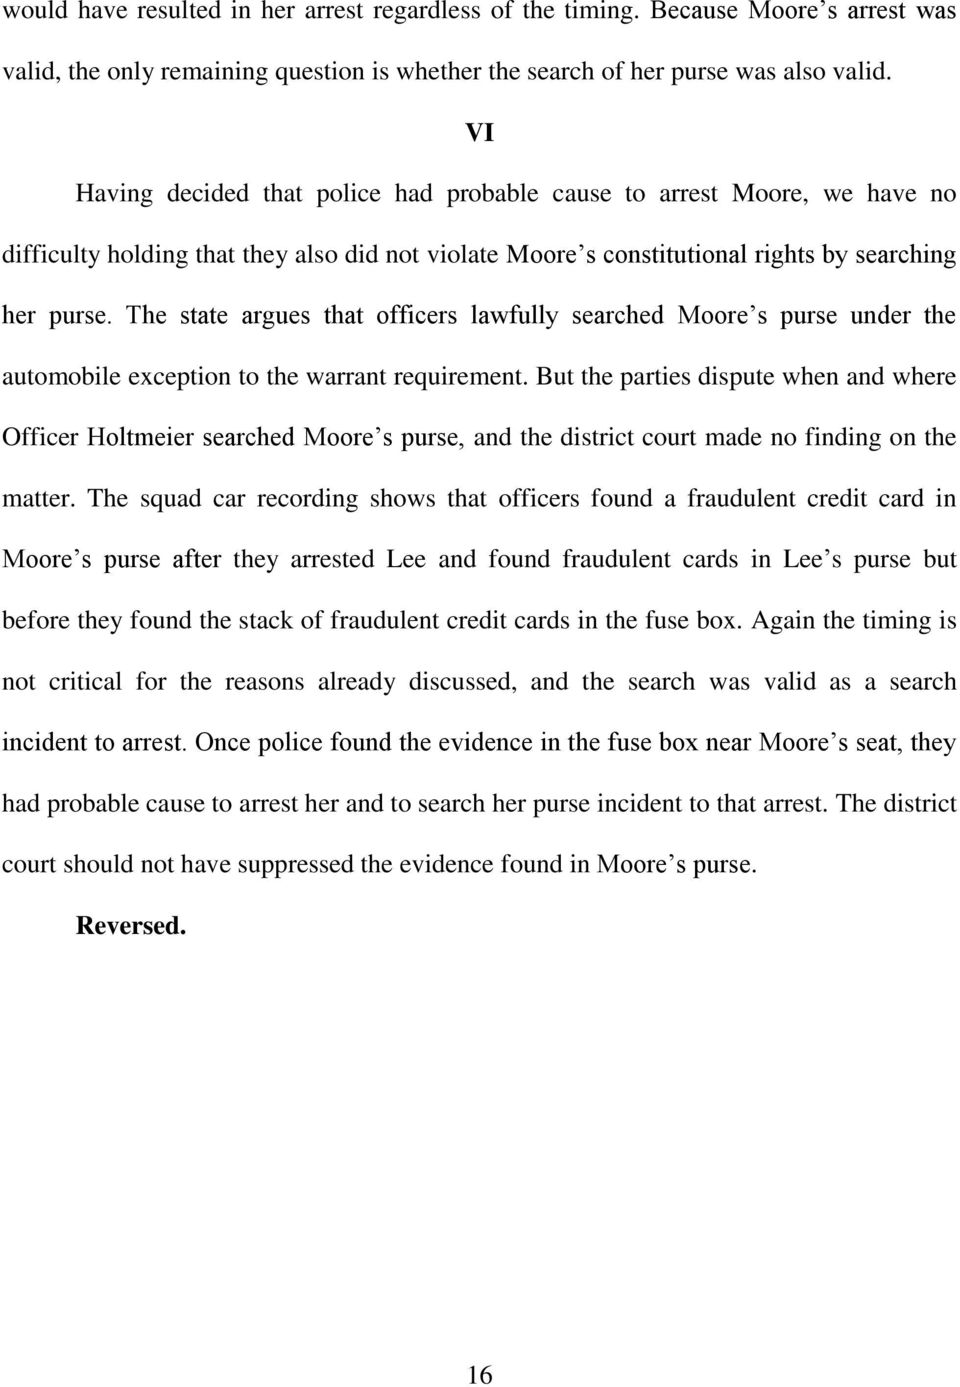 The state argues that officers lawfully searched Moore s purse under the automobile exception to the warrant requirement.